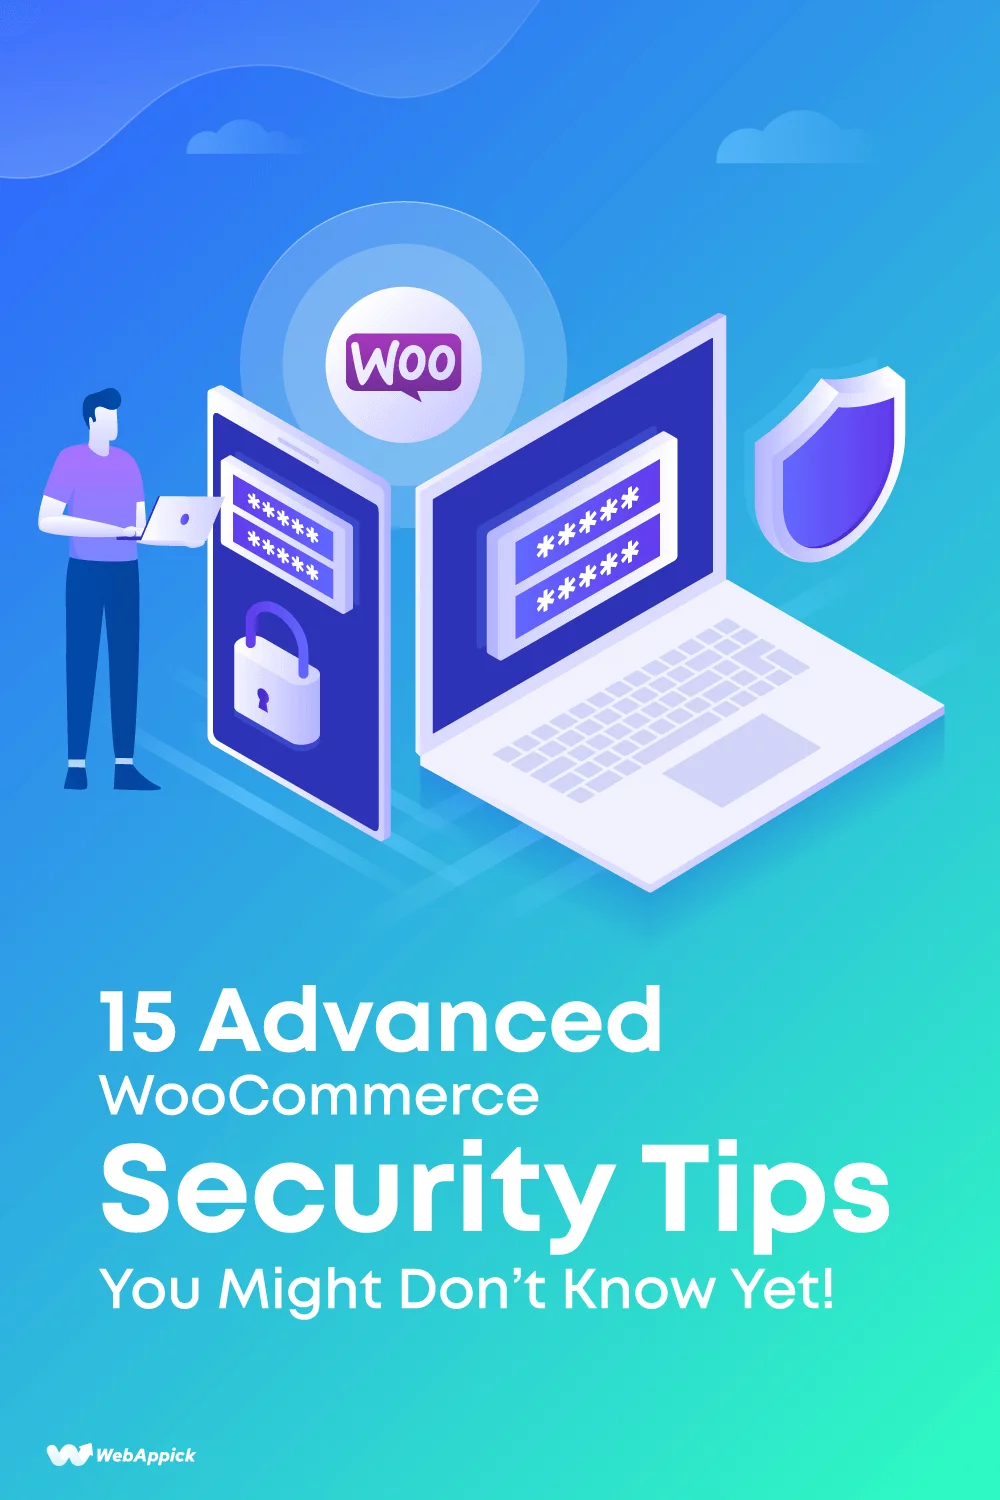 15 Advanced WooCommerce Security Tips You Might Not Know Yet!